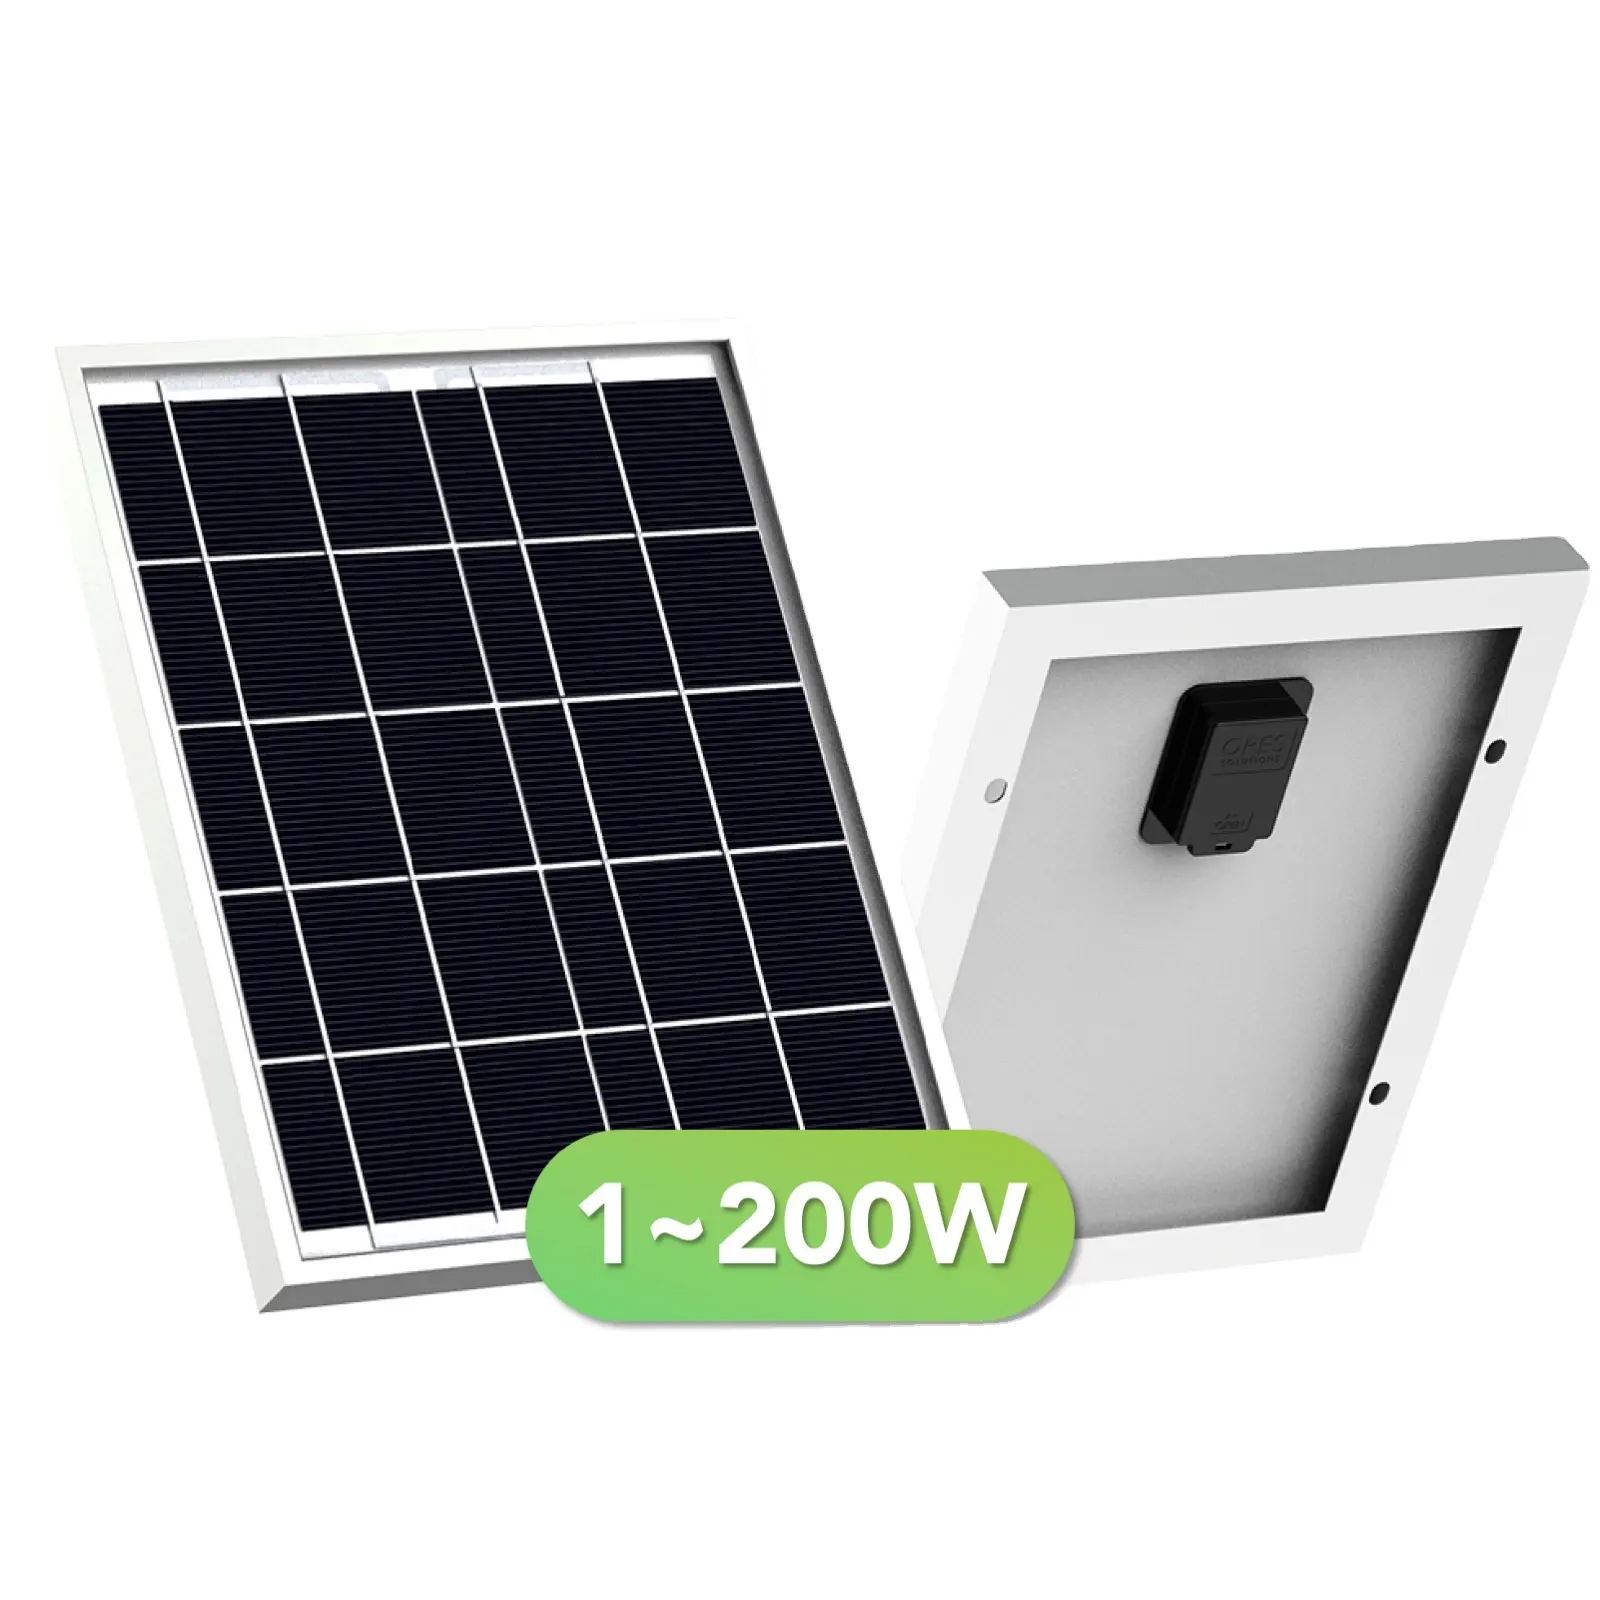 mini solar panel usb output small size 5.5V 3W vehicle mounted MONO solar panel for outdoor security camera